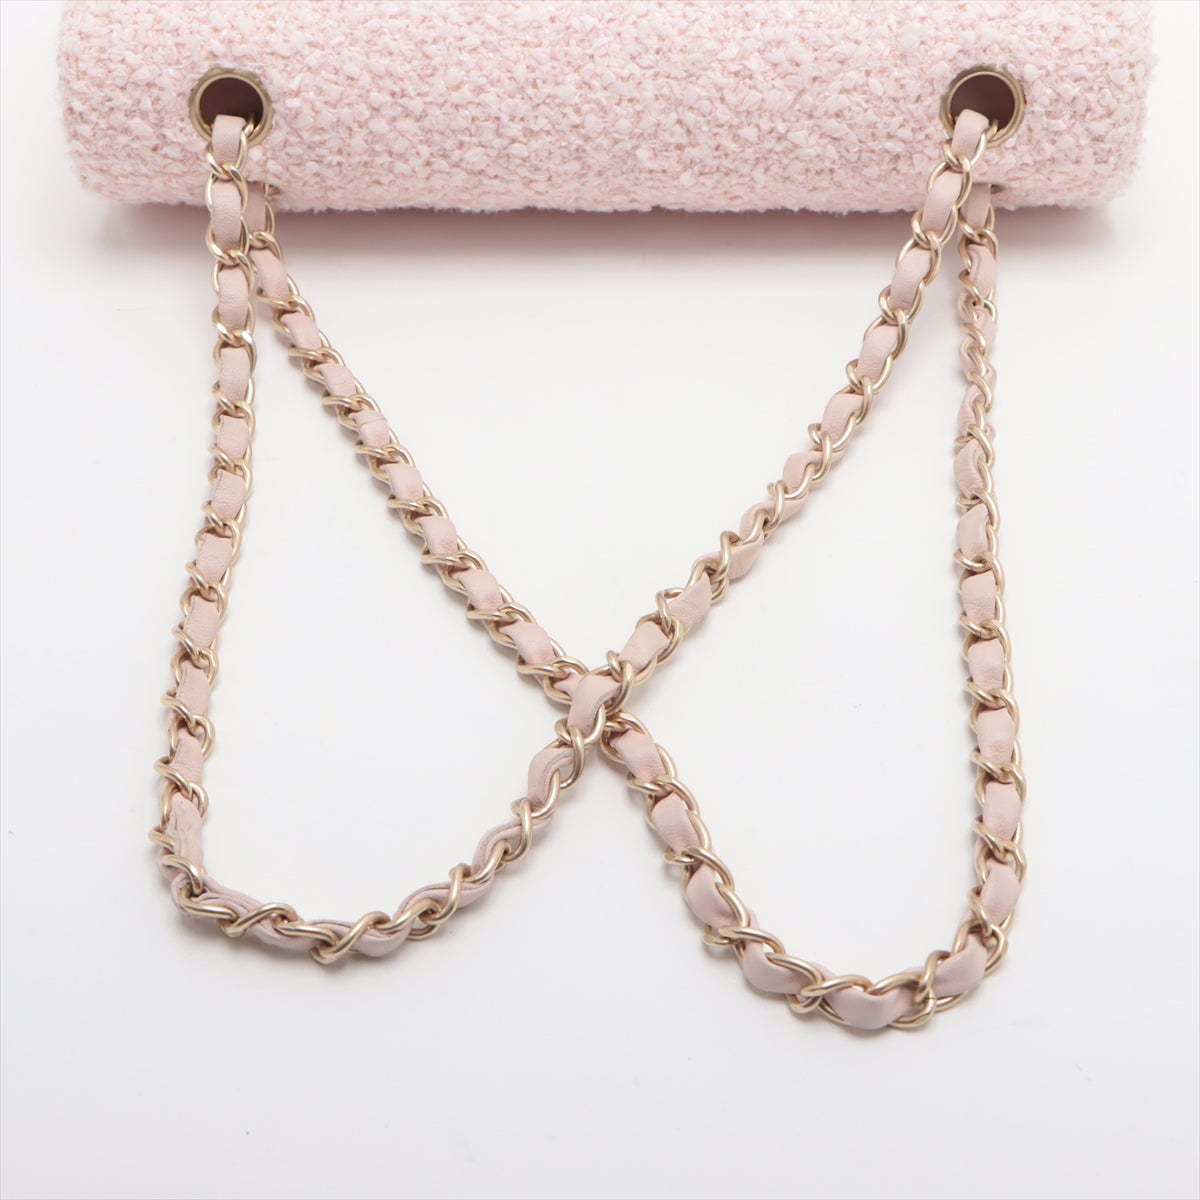 Chanel Matelasse Tweed Double flap Double chain bag Pink Gold Metal fittings 8XXXXXX